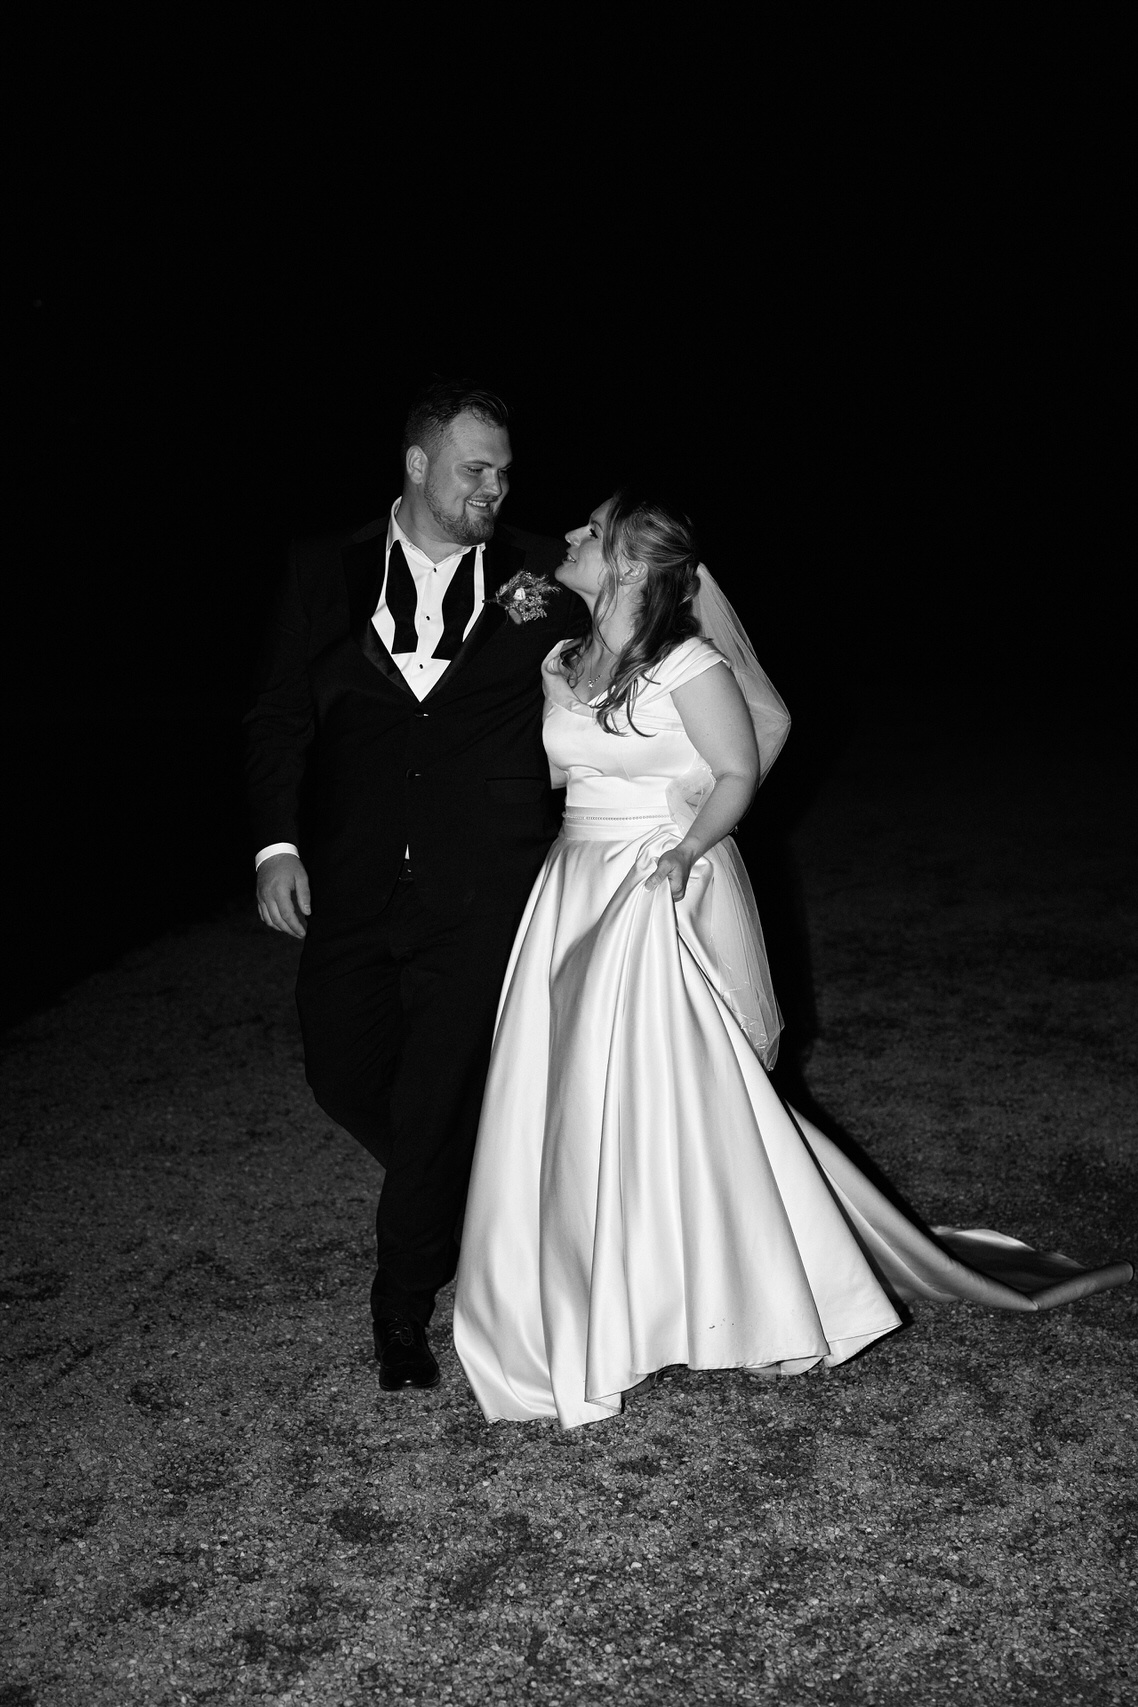 A married couple is standing in a field at night.